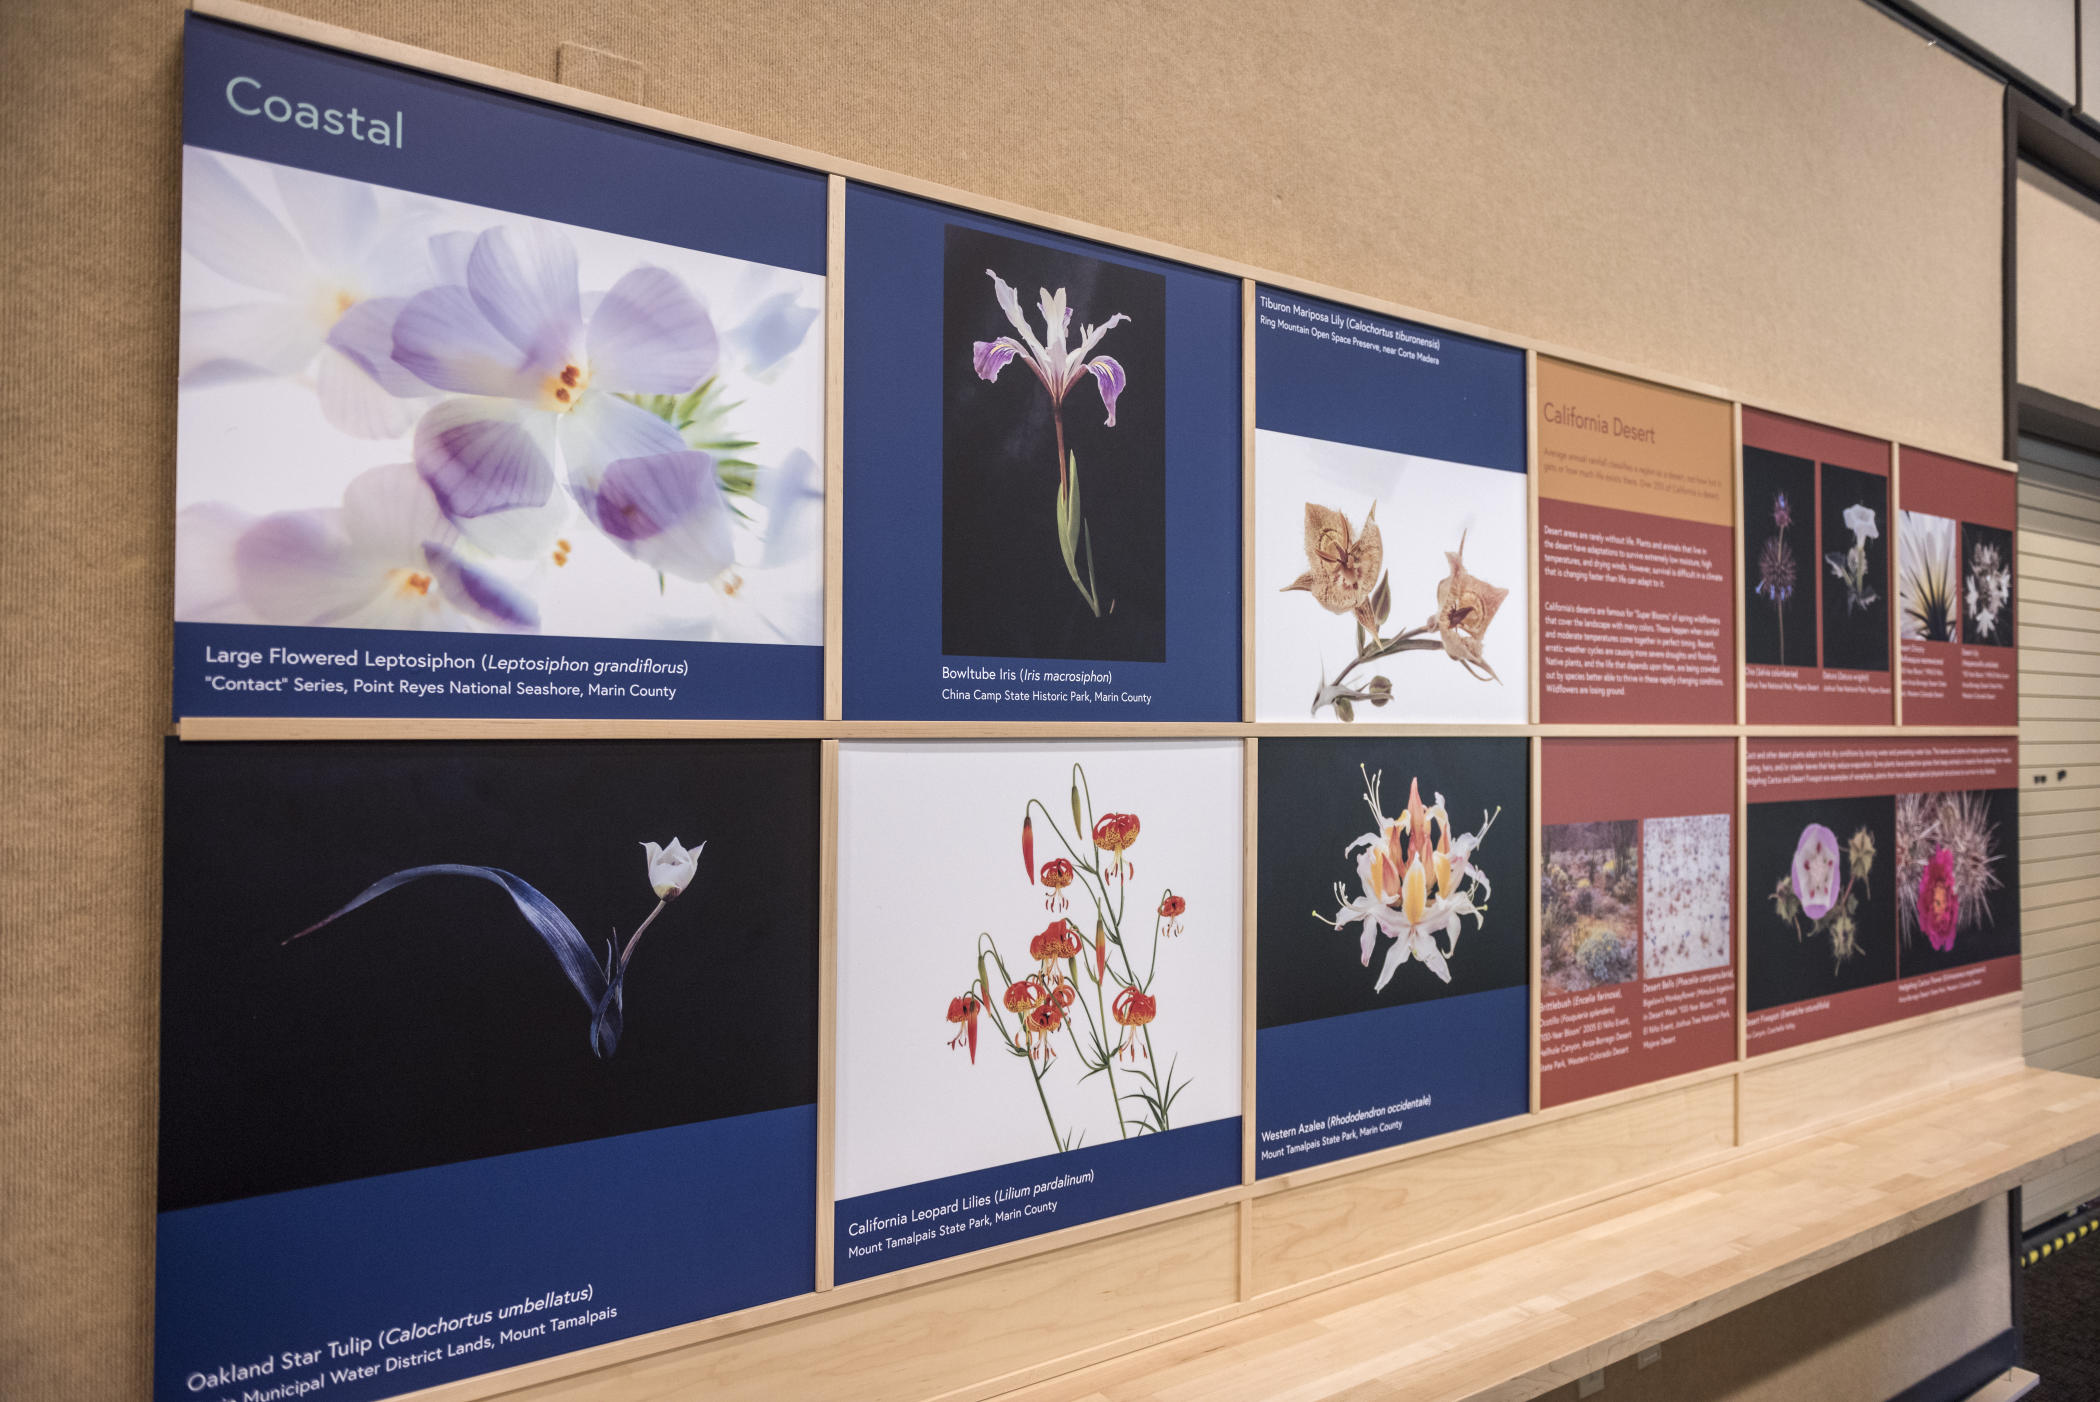 One of the Gateway Science Museum's new exhibits, "Beauty and The Beast: California Wildflowers and Climate Change," will be on display in the Newberry Gallery through summer 2019.